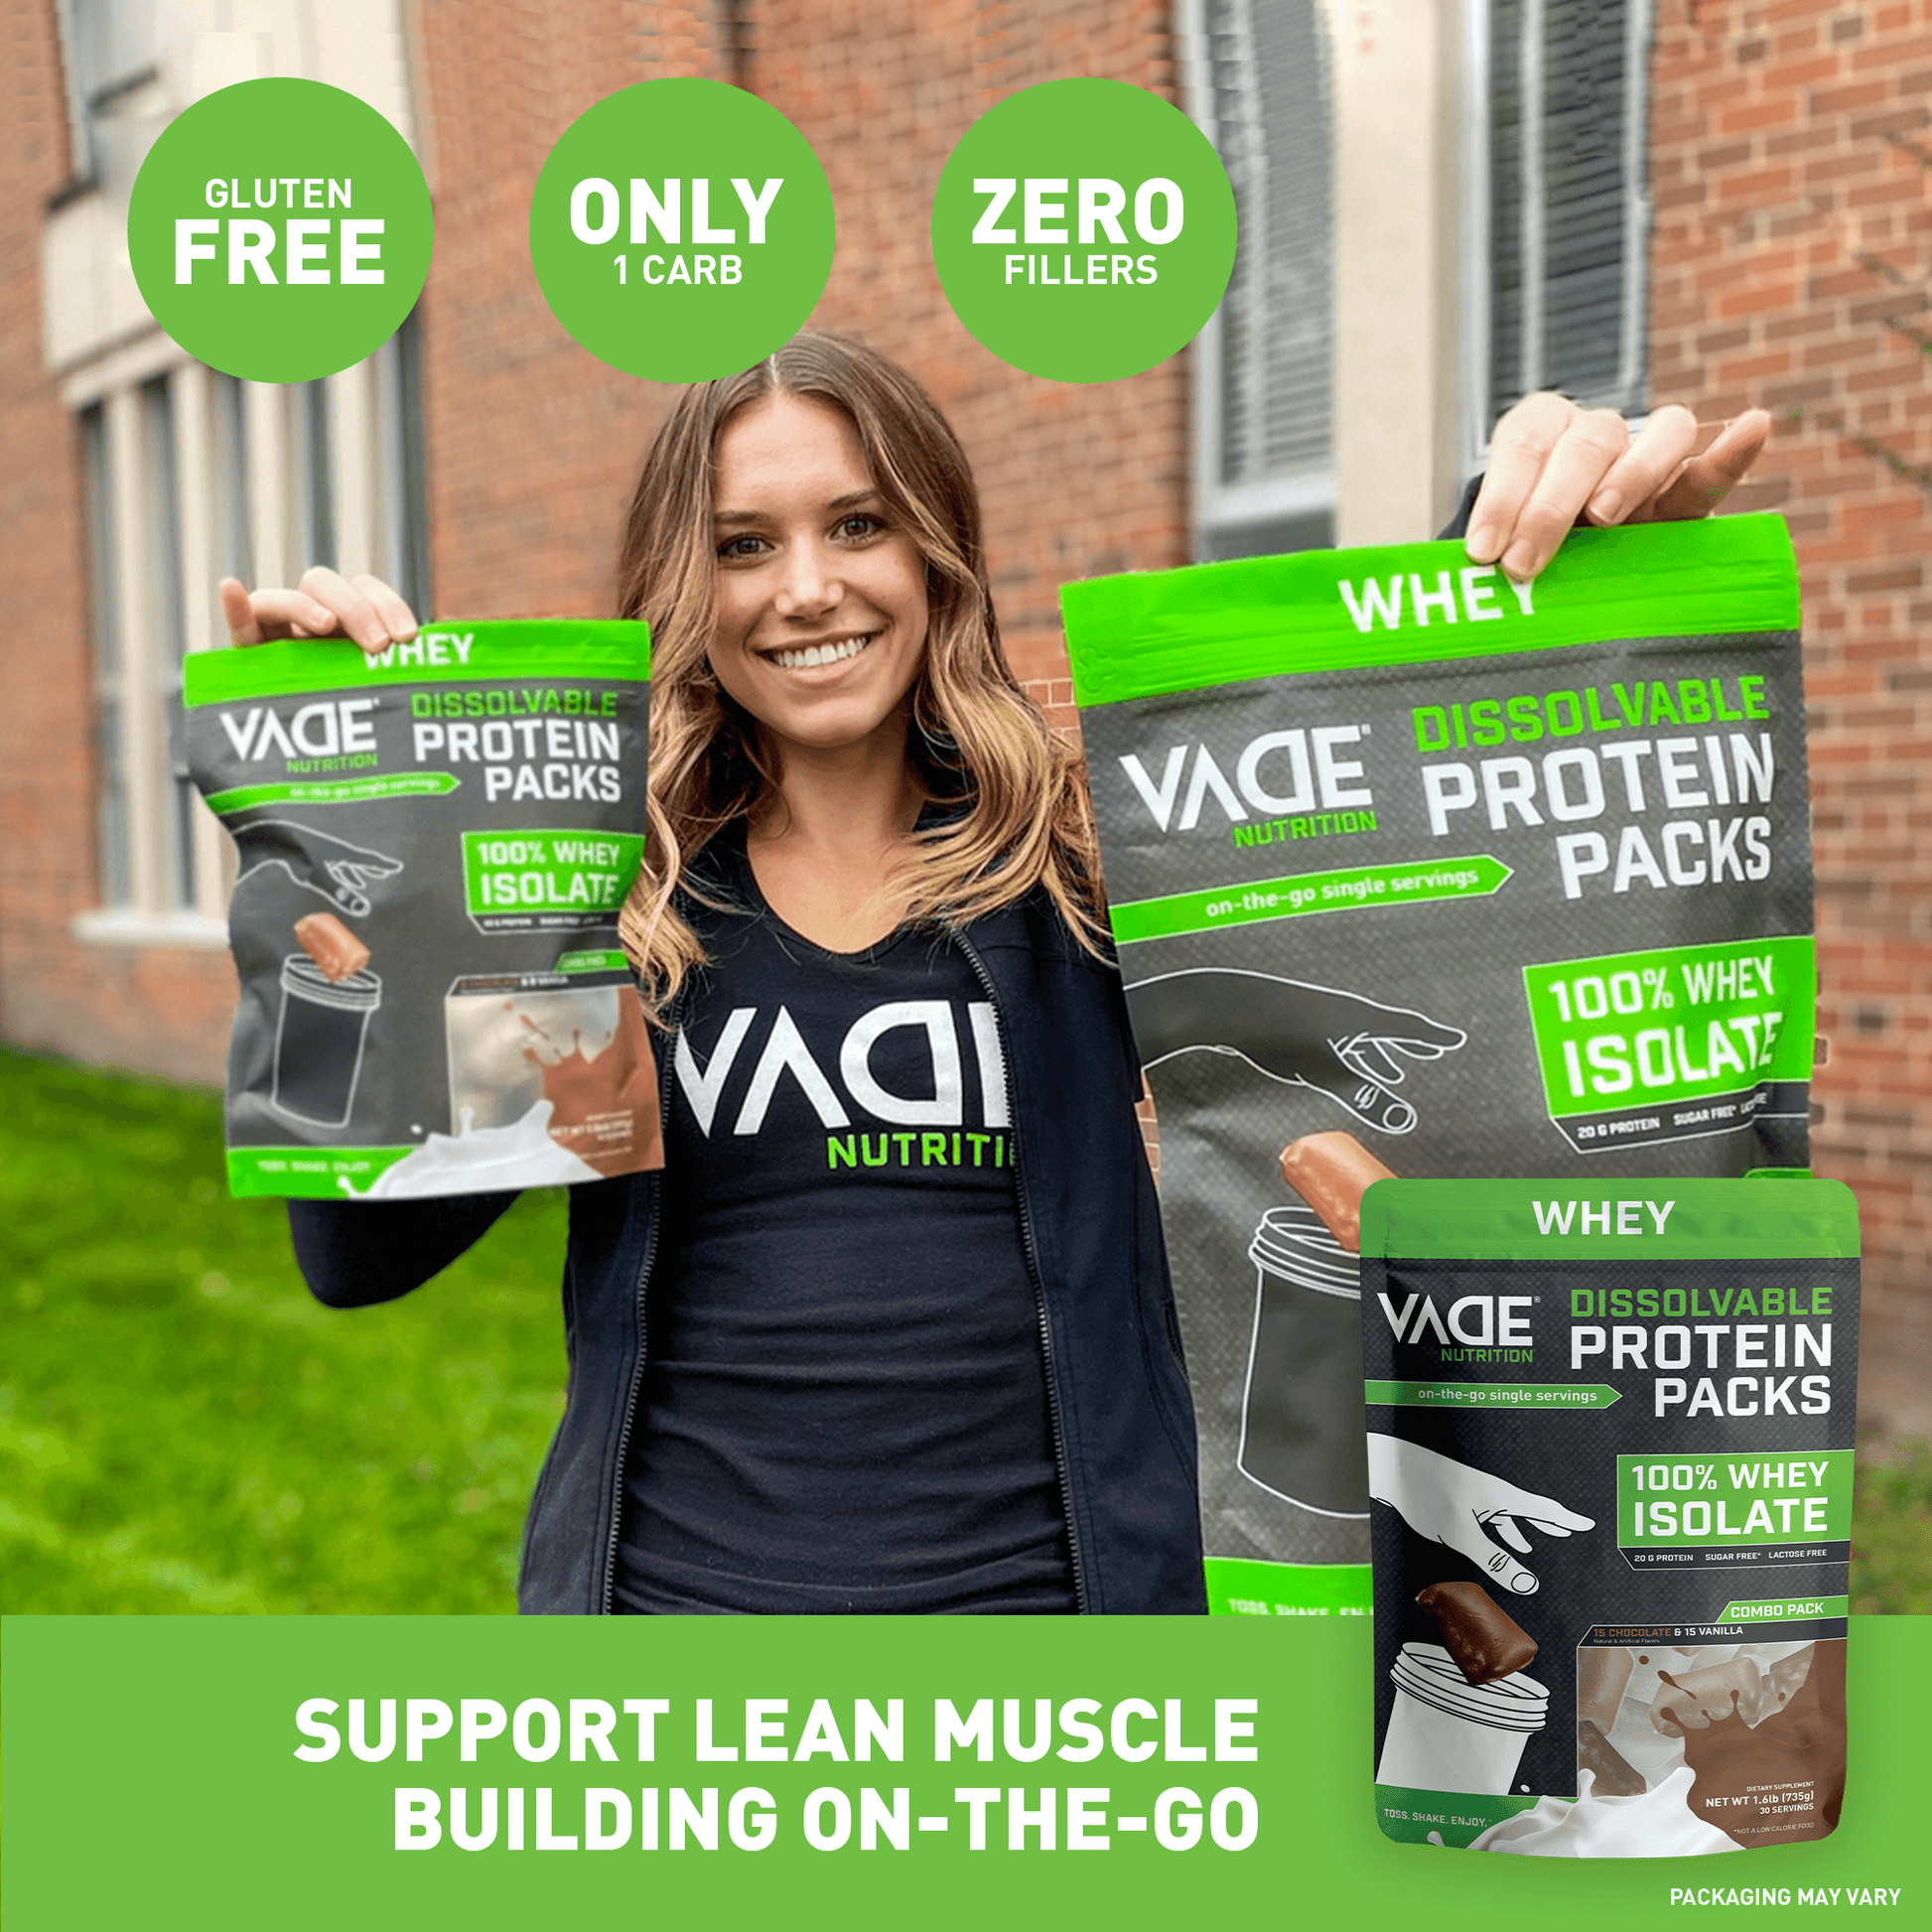  VADE Nutrition Dissolvable Protein Packs - 100% Whey Isolate  Protein Powder Cappuccino - Low Carb, Low Calorie, Lactose Free, Sugar  Free, Fat Free, Gluten Free - 16 Packets to Go : Health & Household